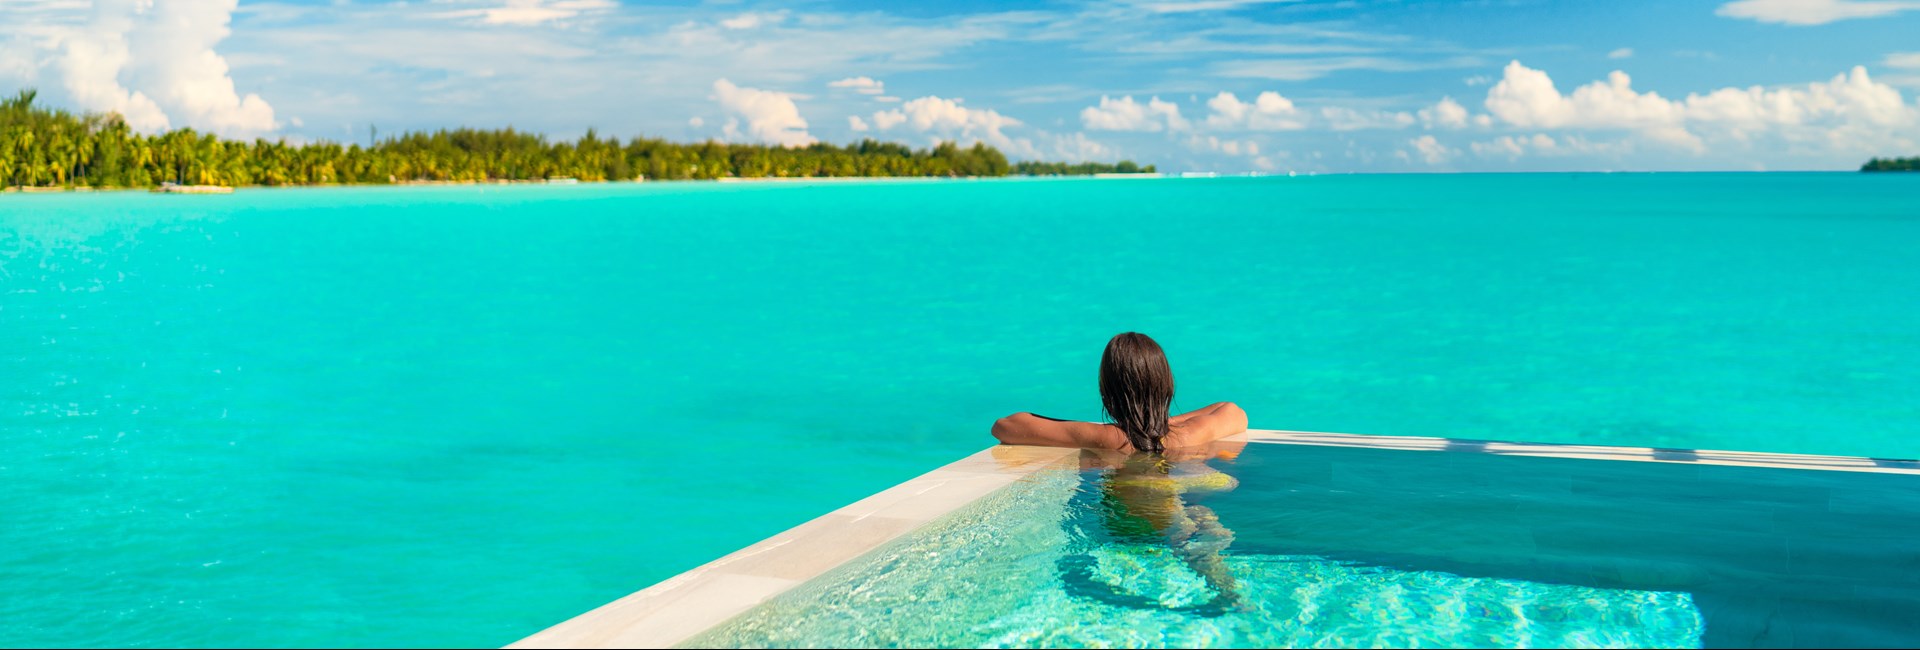 Woman relaxing in infinity pool on luxury beach holiday